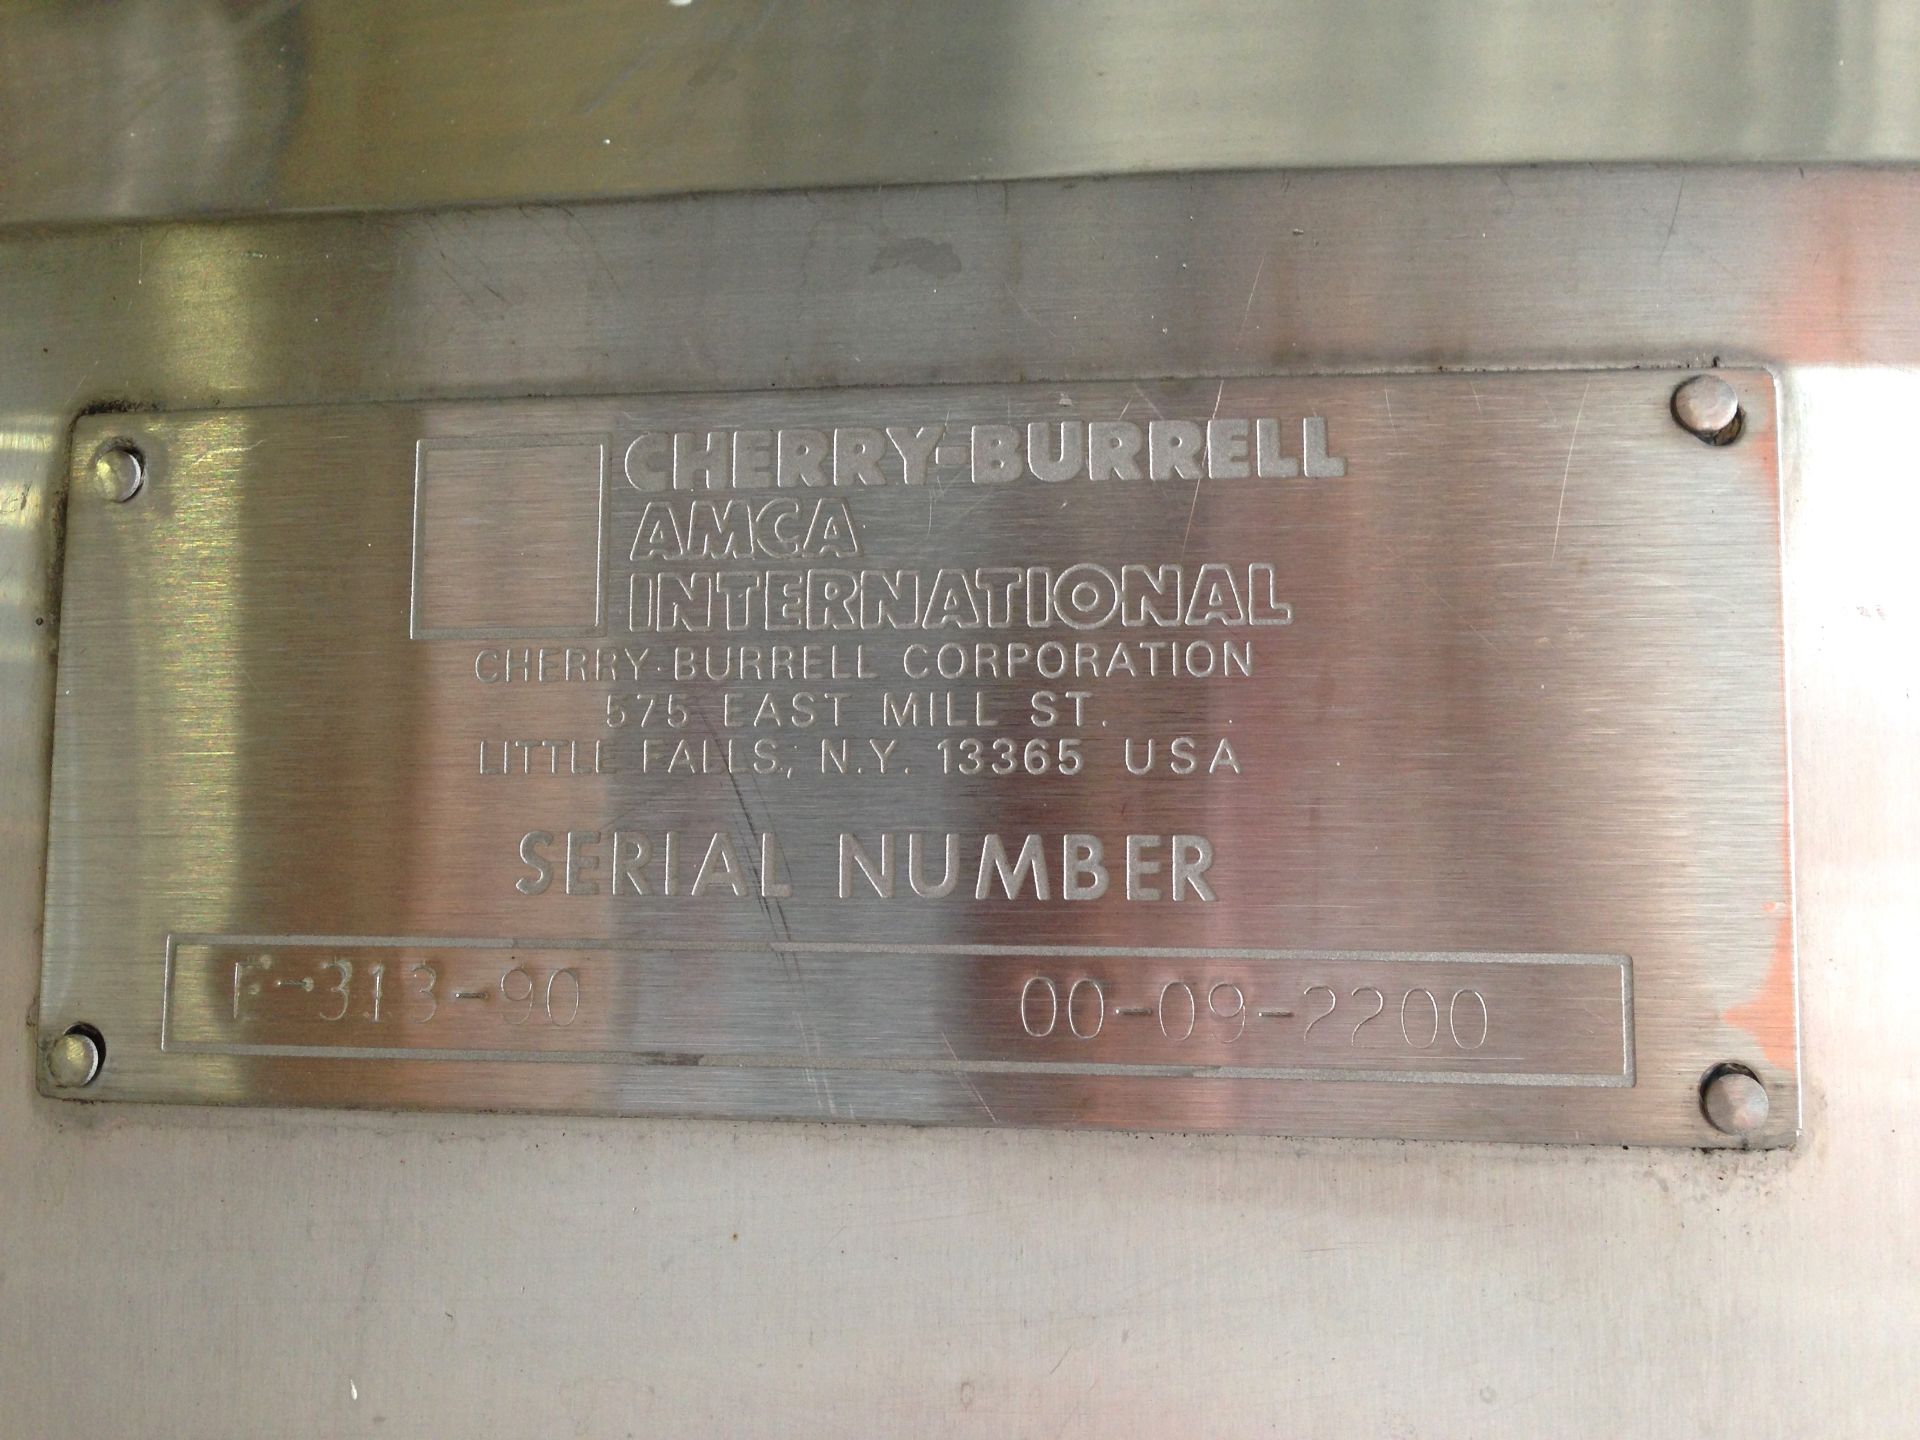 Cherry-Burrell 500 Gallon Jacketed Processor Tank Serial: E-313-90 Year: 1990316L Stainless Steel - Image 5 of 10